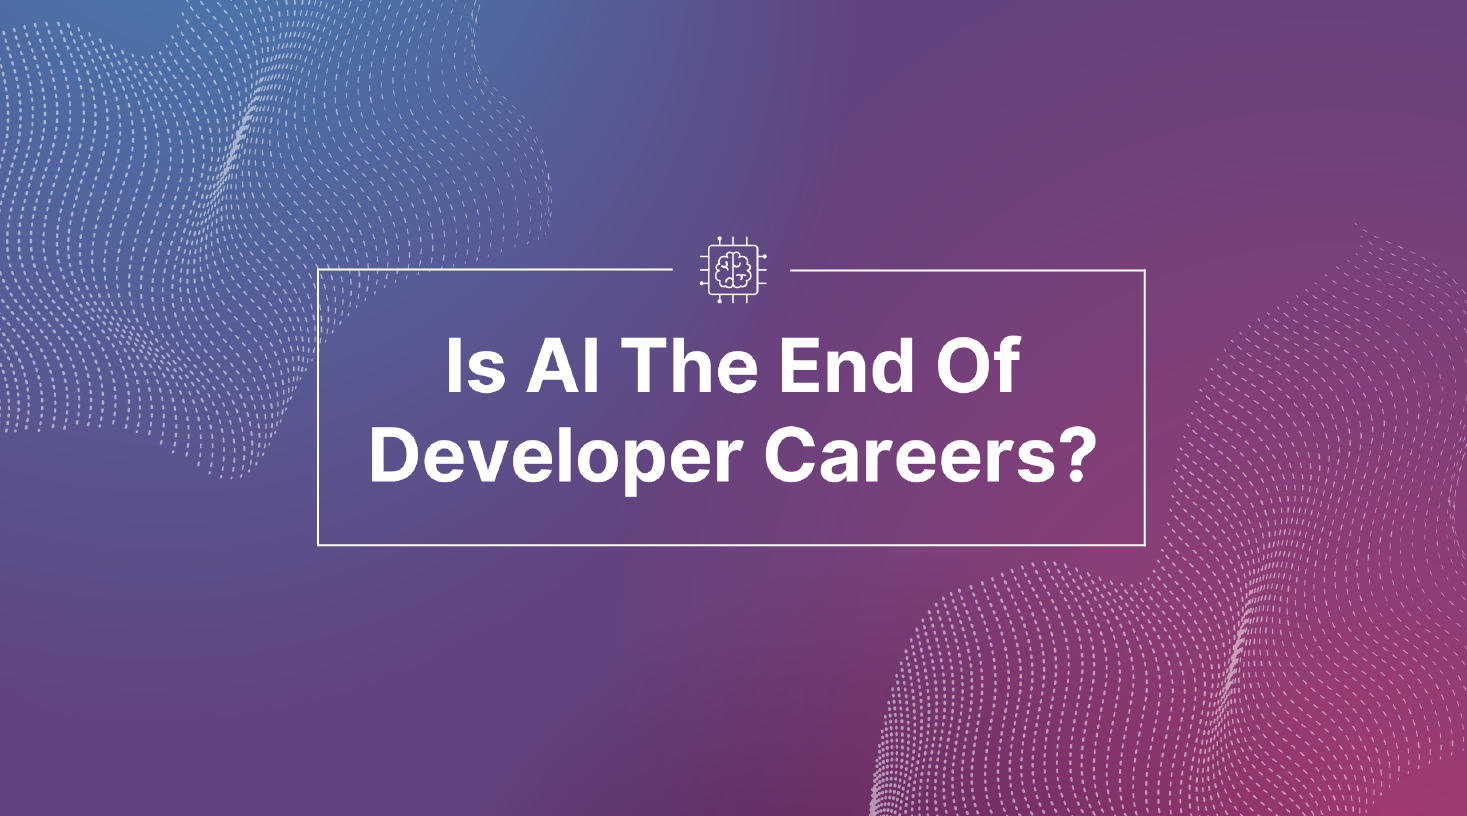 Debugging the fear around if is AI the end of developer careers